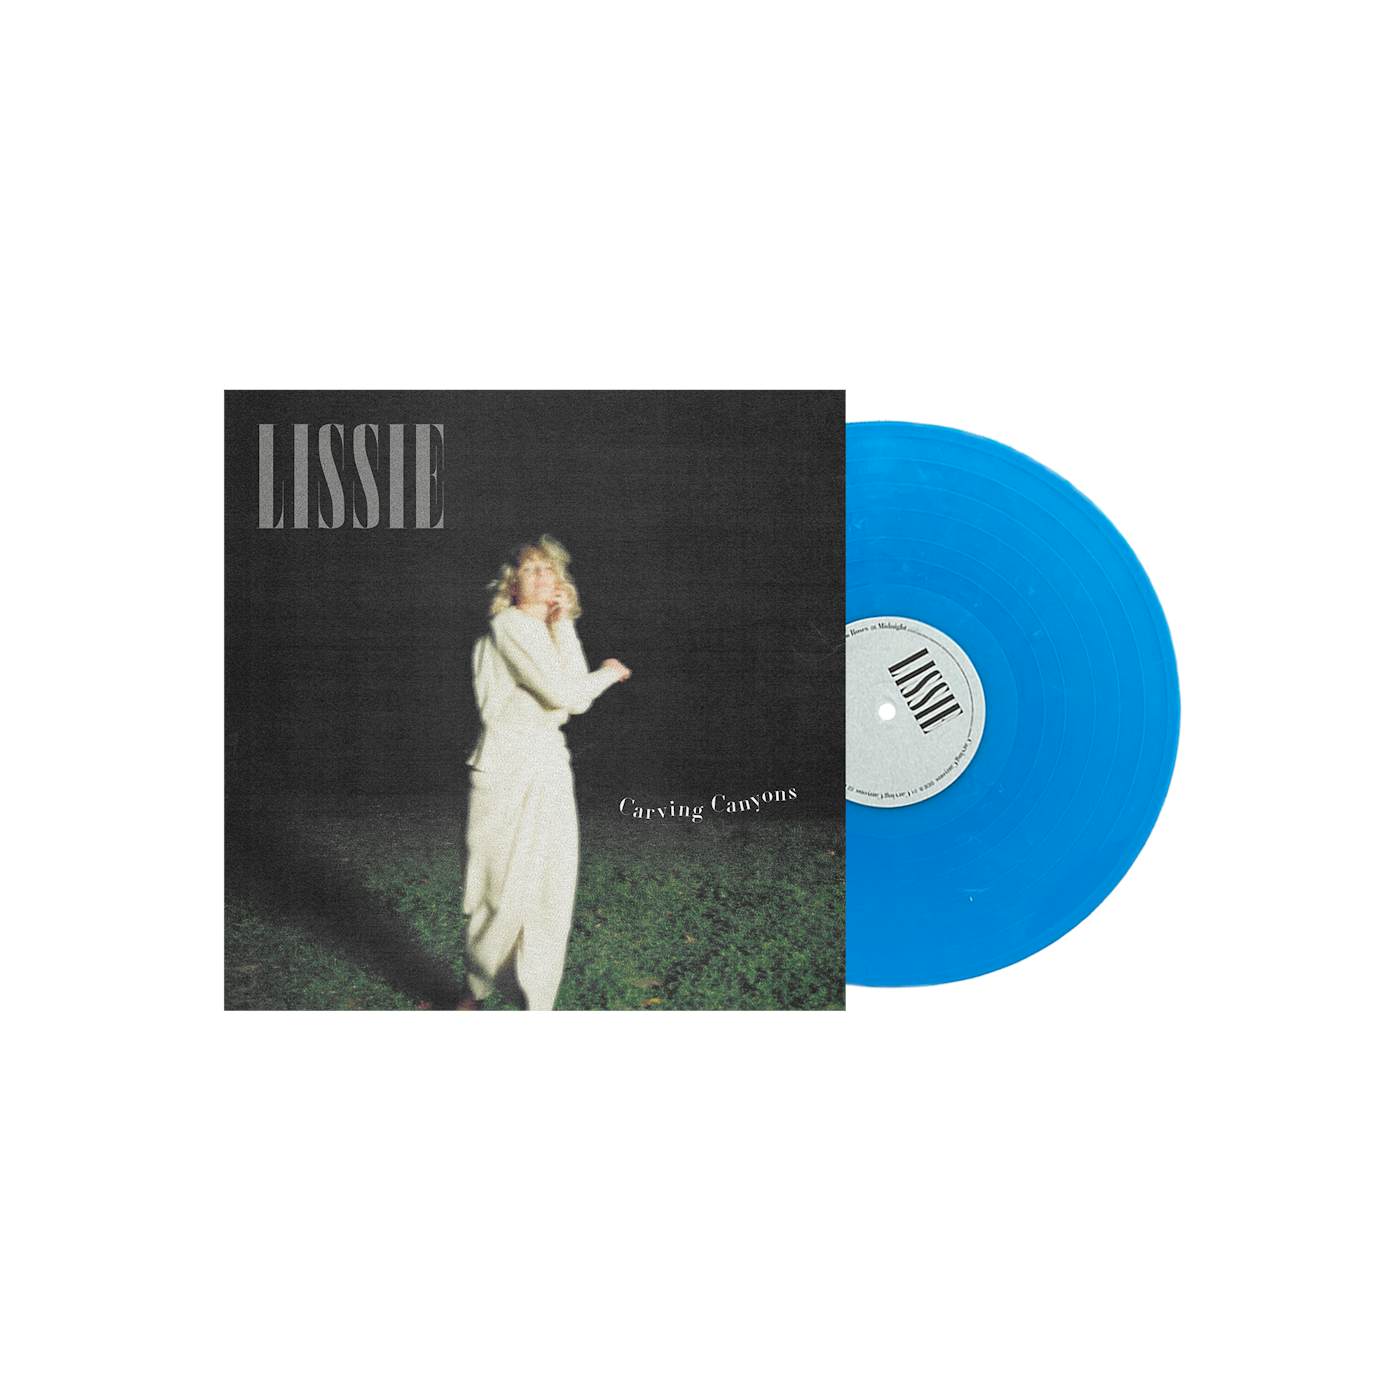 Lissie Carving Canyons - LP (Vinyl)